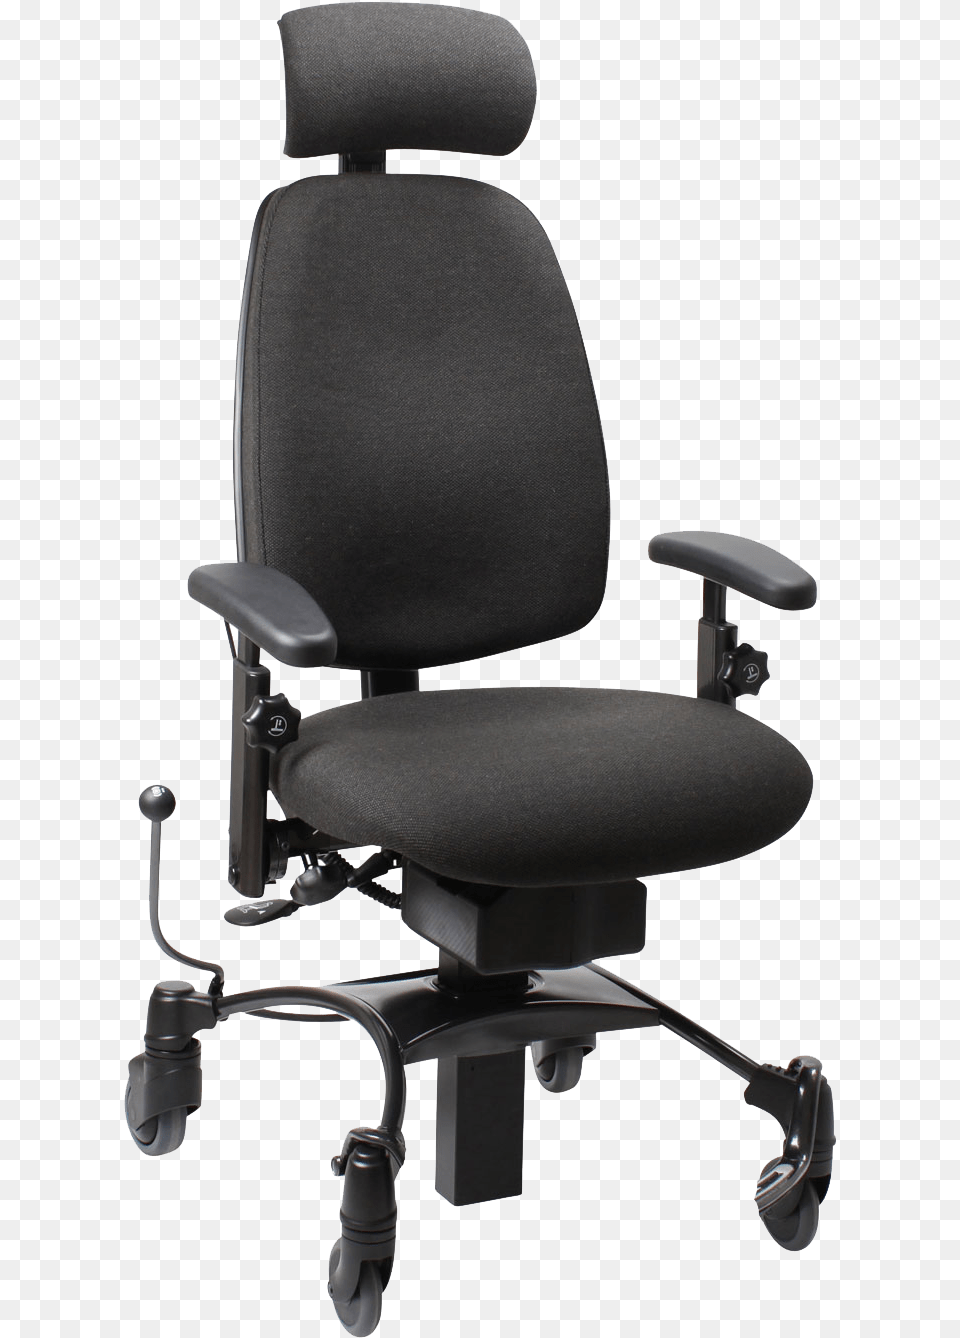 Vela Tango 510el T3 Right2 Office Chairs With Brakes Uk, Cushion, Furniture, Home Decor, Chair Png